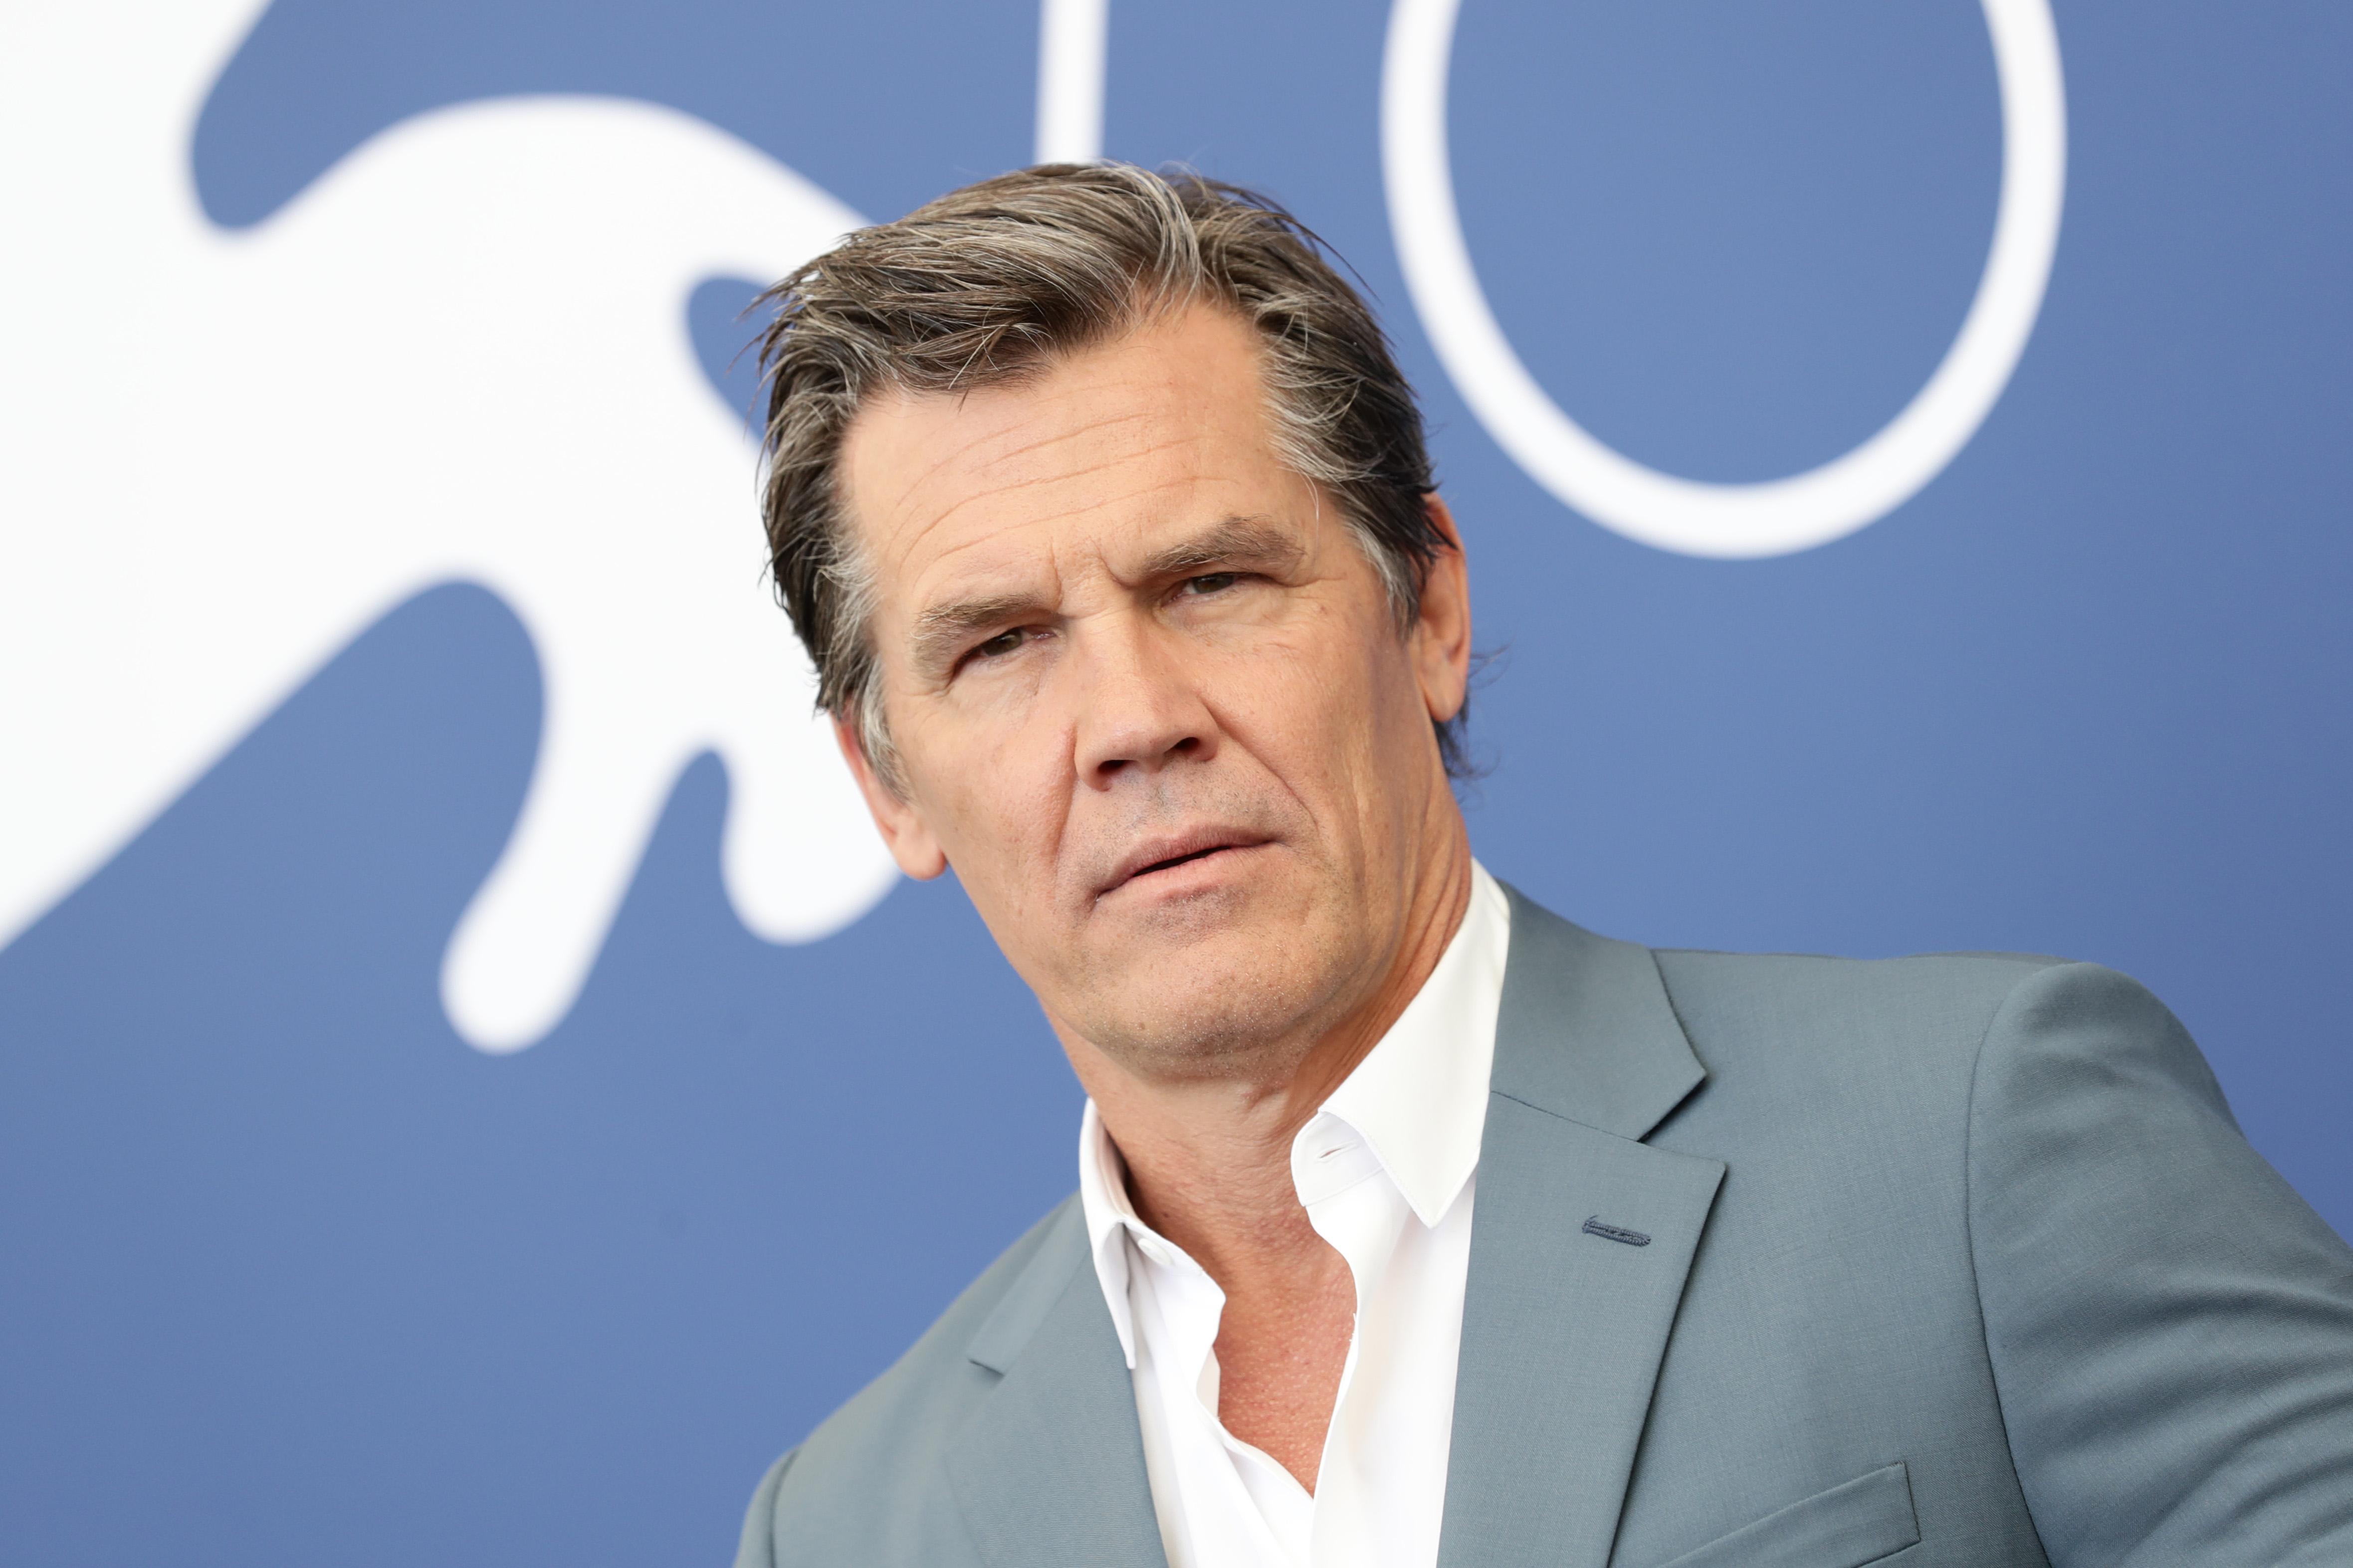 Josh Brolin, who almost starred in The Wolf of Wall Street, attends the Venice International Film Festival for the movie Dune